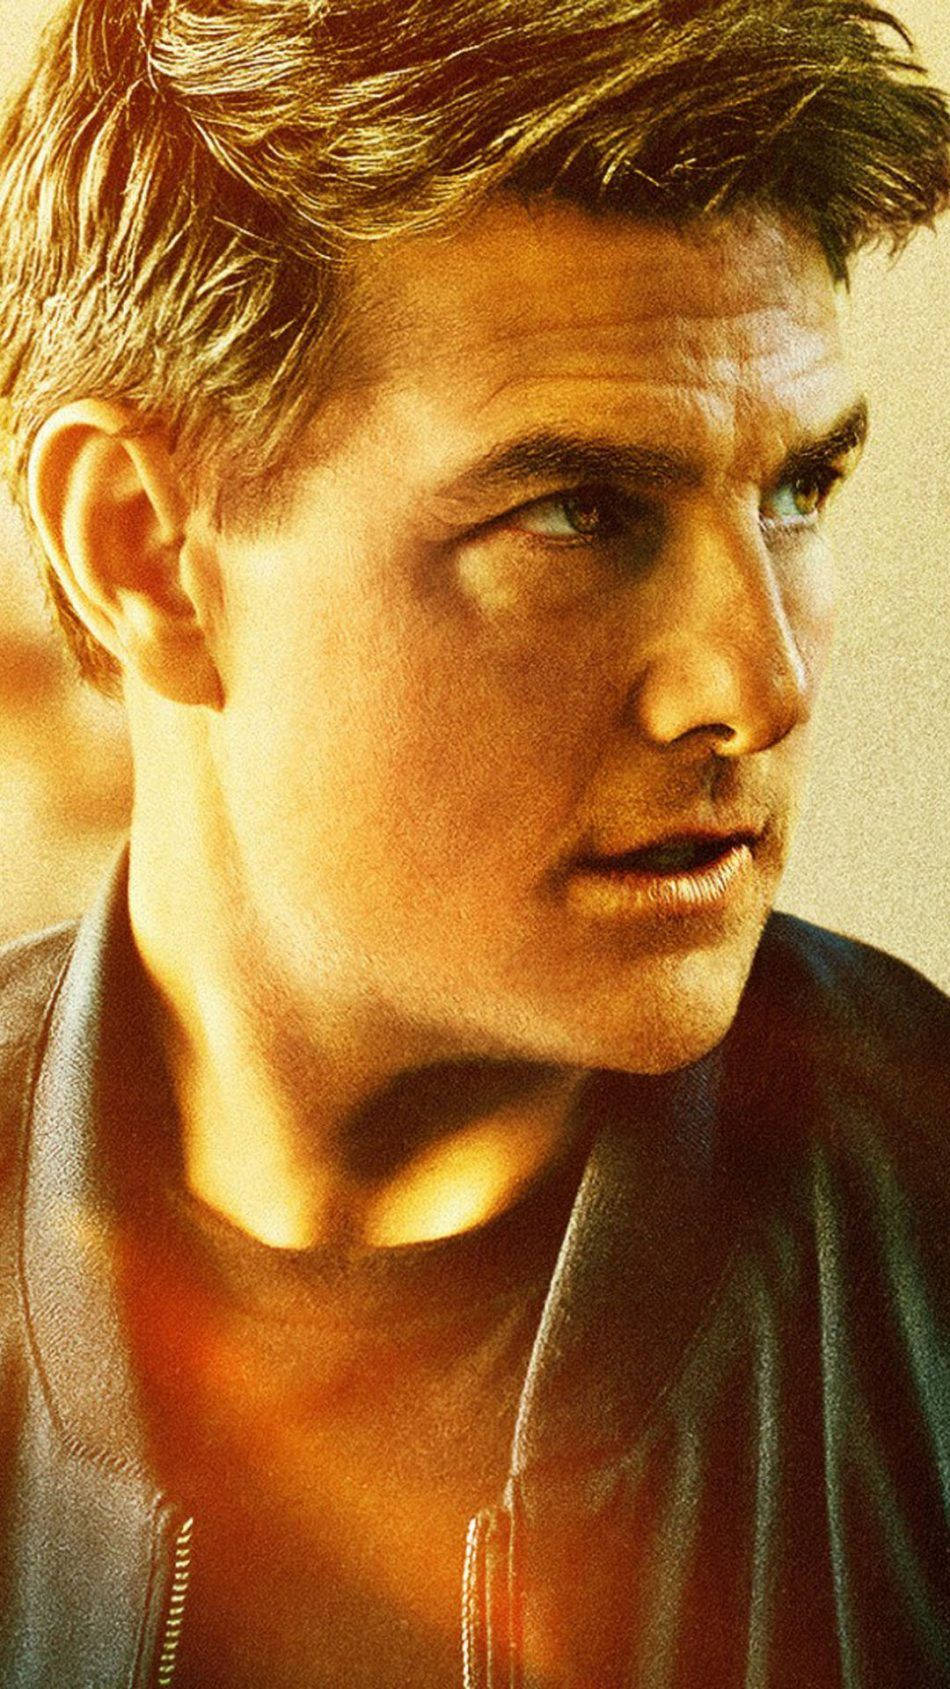 Tom Cruise In Mission Impossible Background